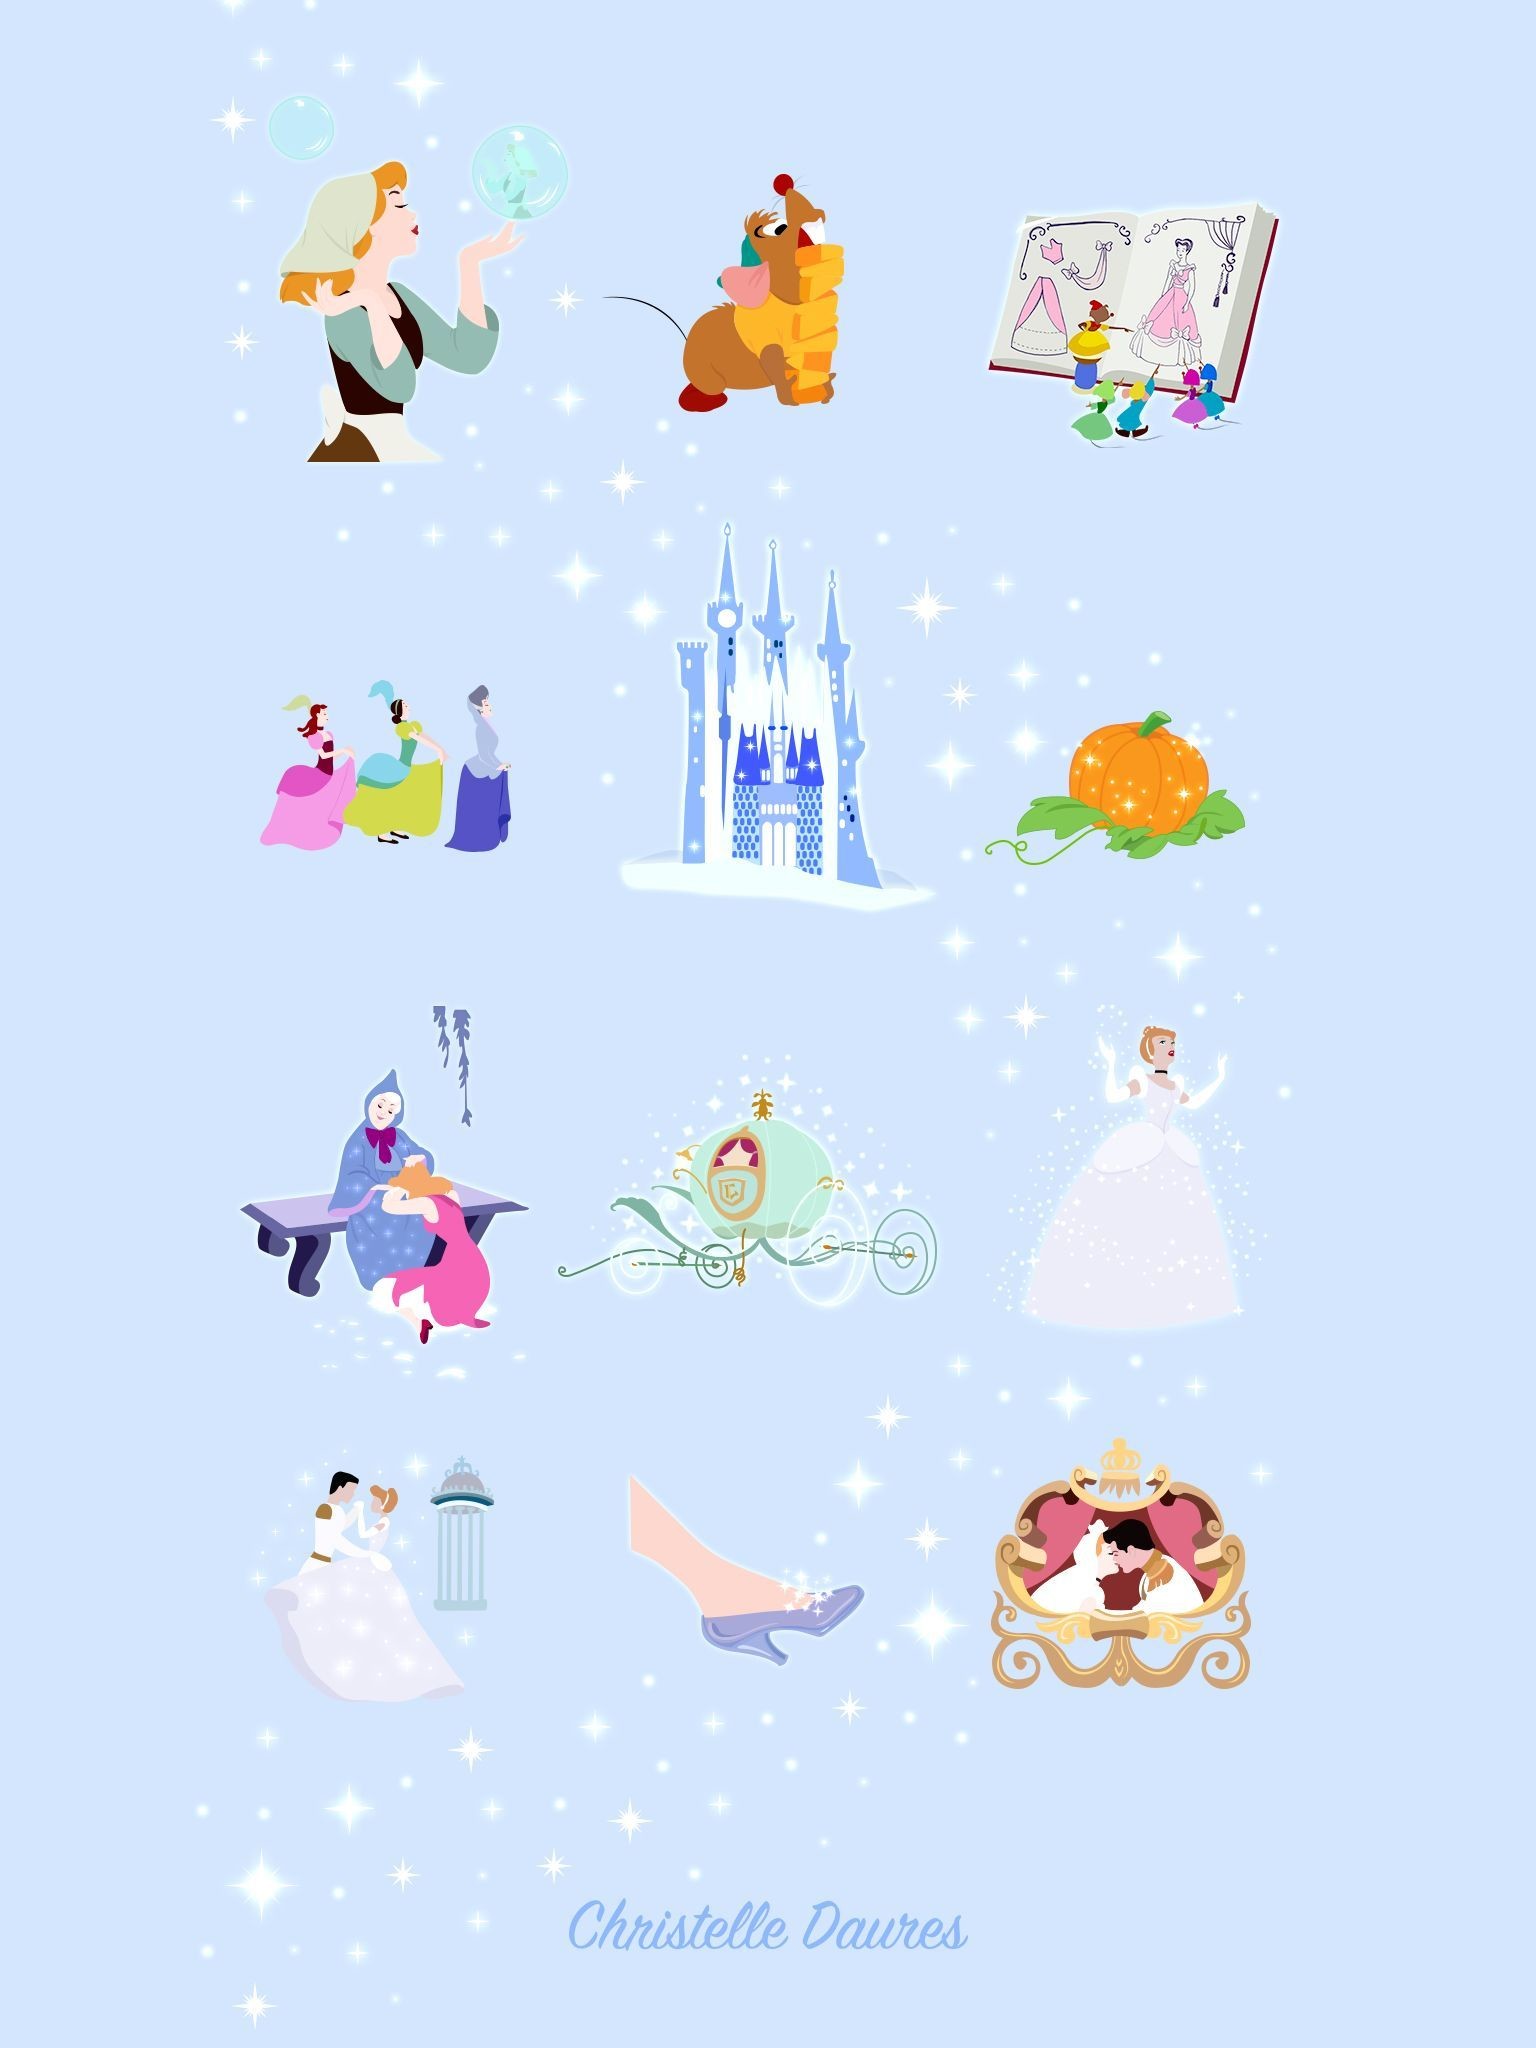 Disney Character Wallpaper (best Disney Character Wallpaper and image) on WallpaperChat